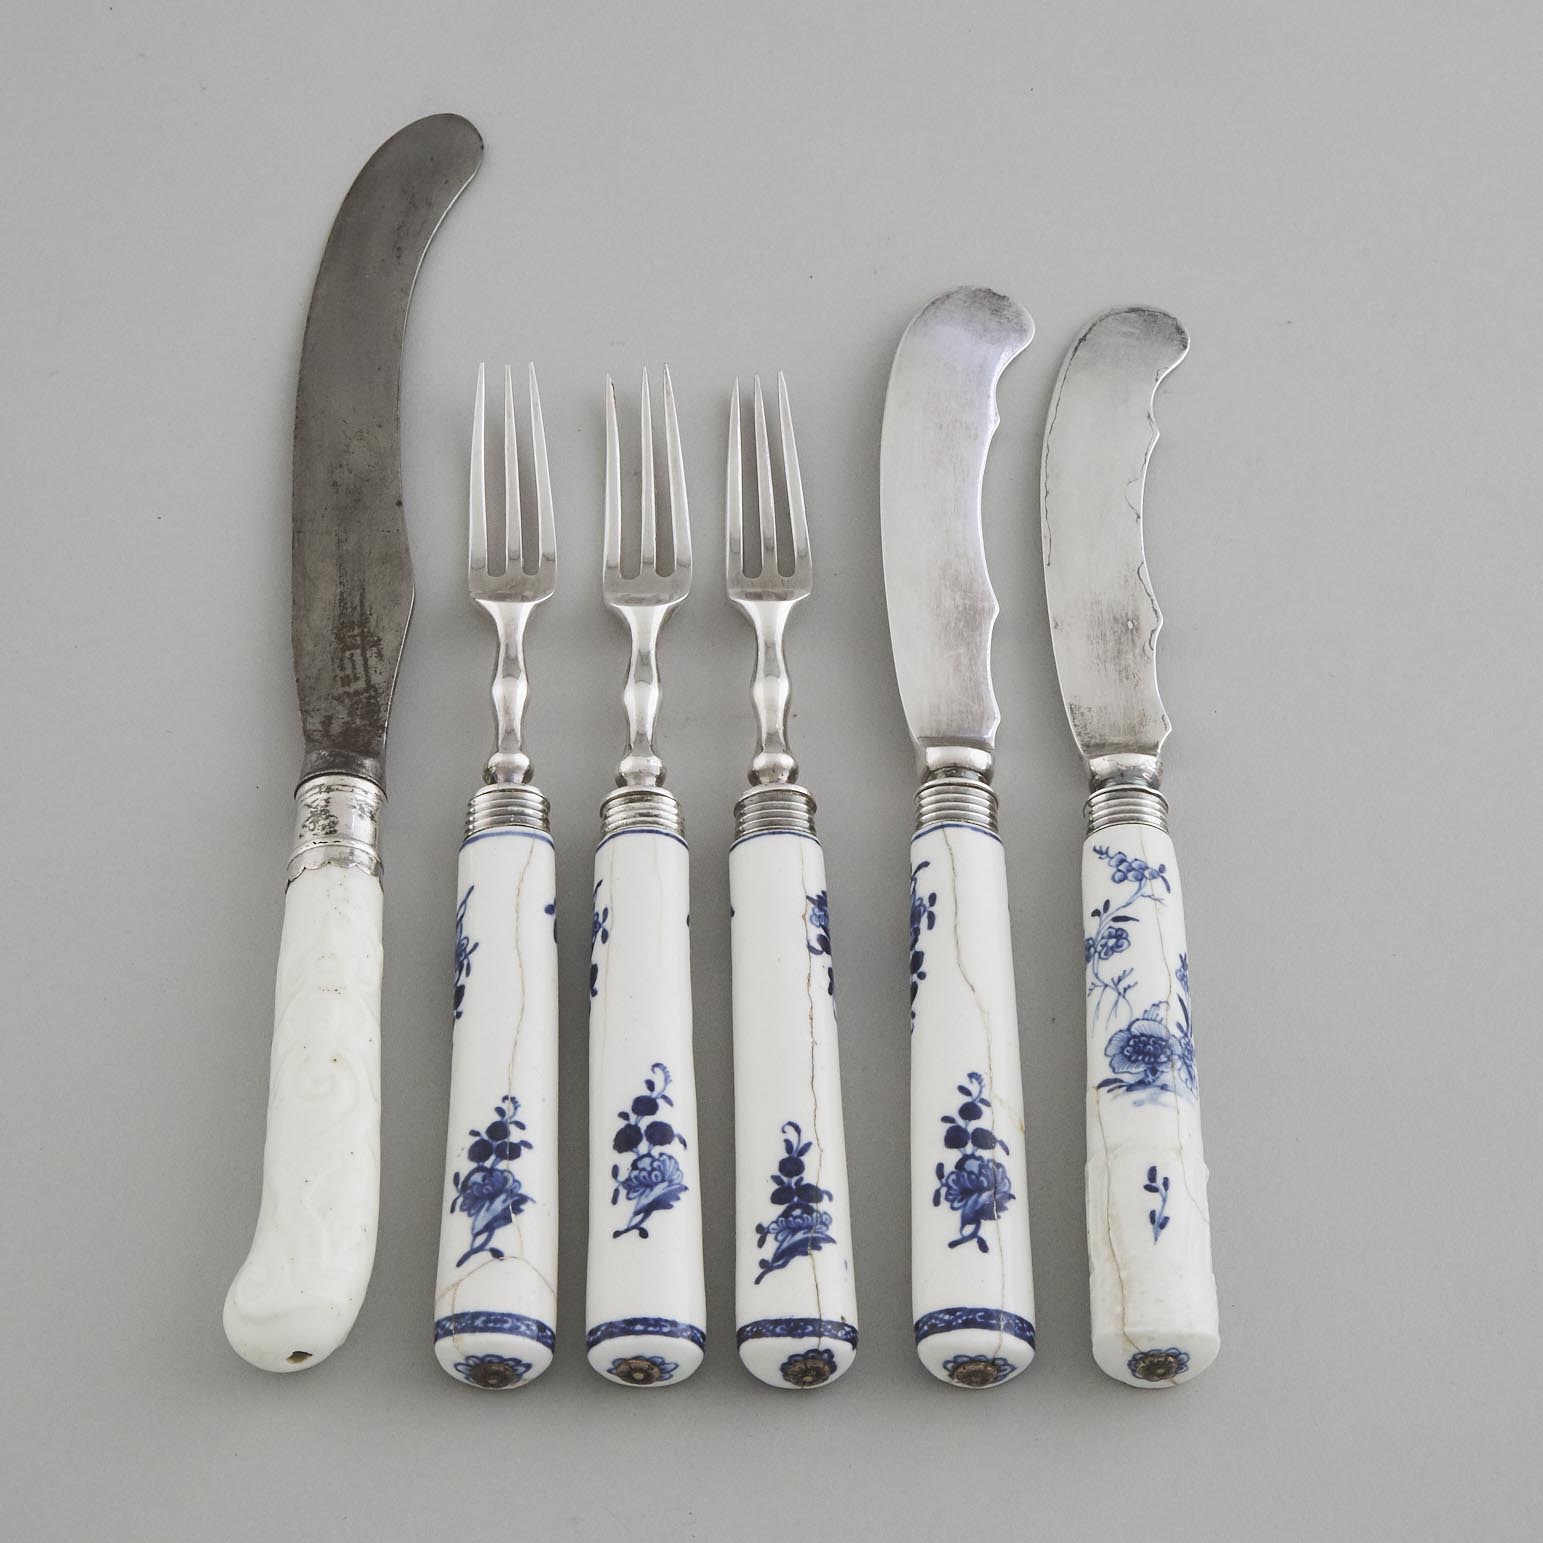 French Porcelain Moulded and White Glazed Knife Handle, probably Saint Cloud, c.1740, together with Five Blue Painted Handles, probably Tournai, c.1775